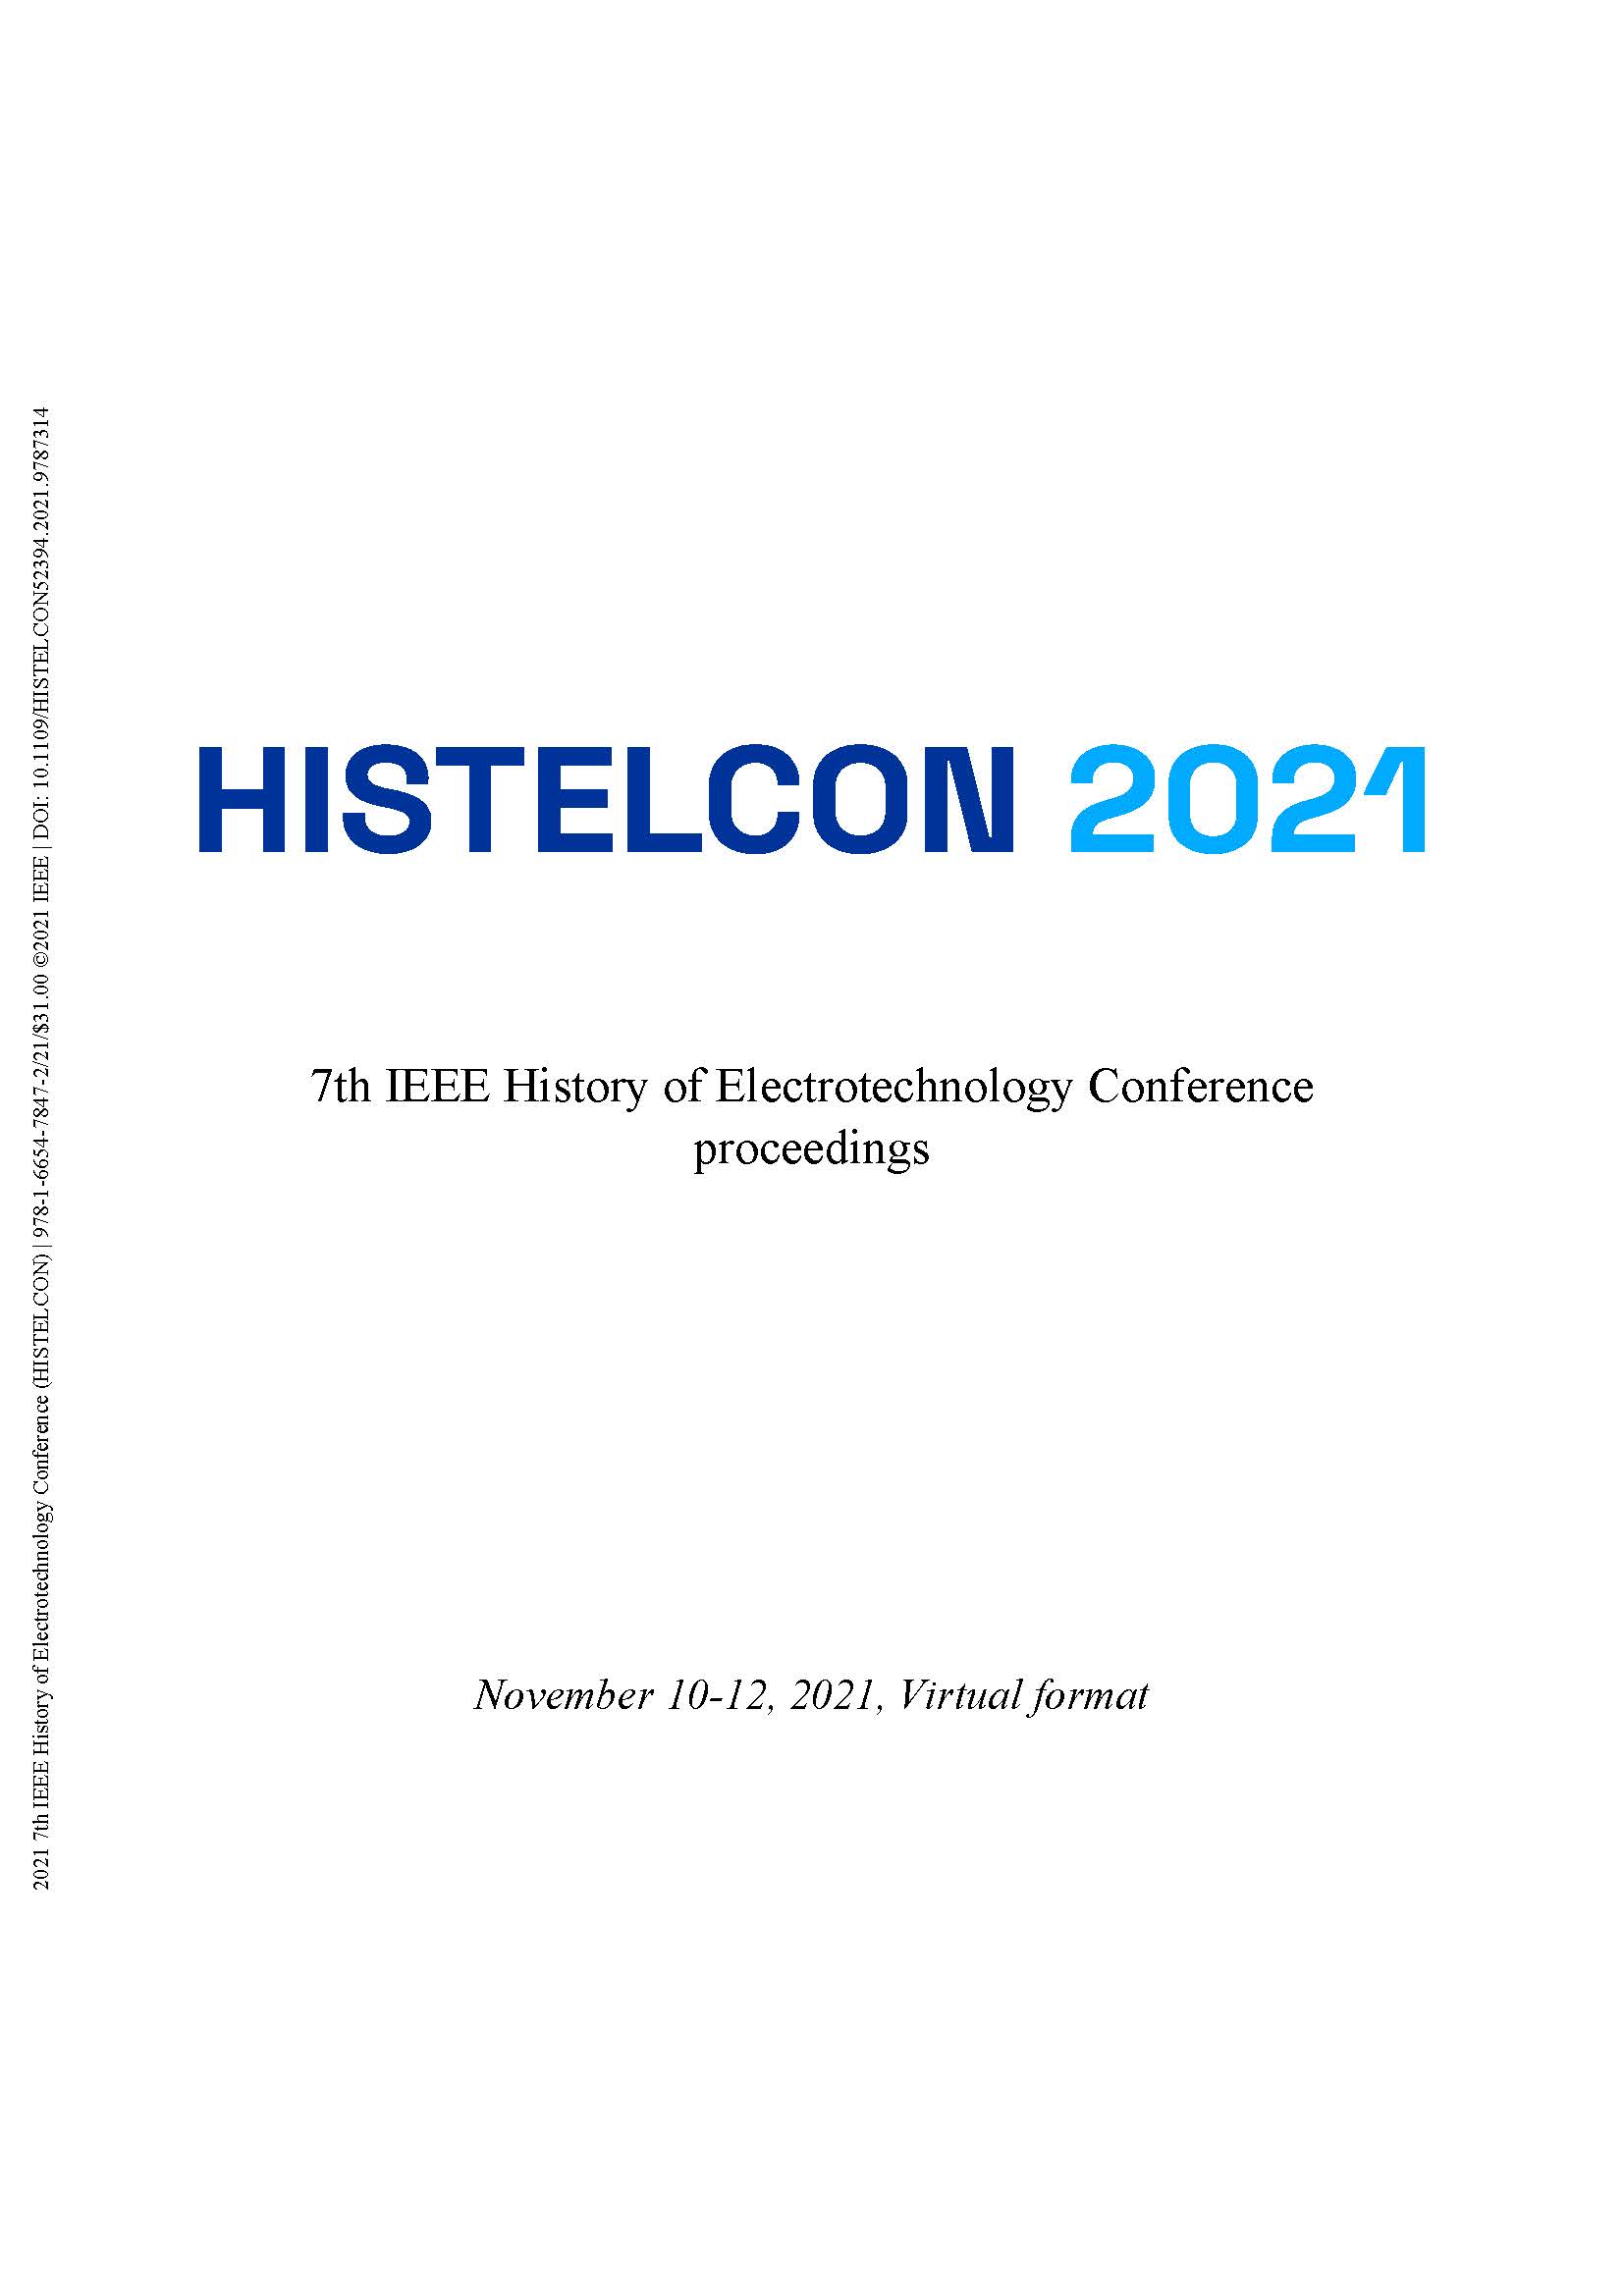 HISTORY OF ELECTROTECHNOLOGY CONFERENCE. IEEE. 7TH 2021. (HISTELCON 2021)